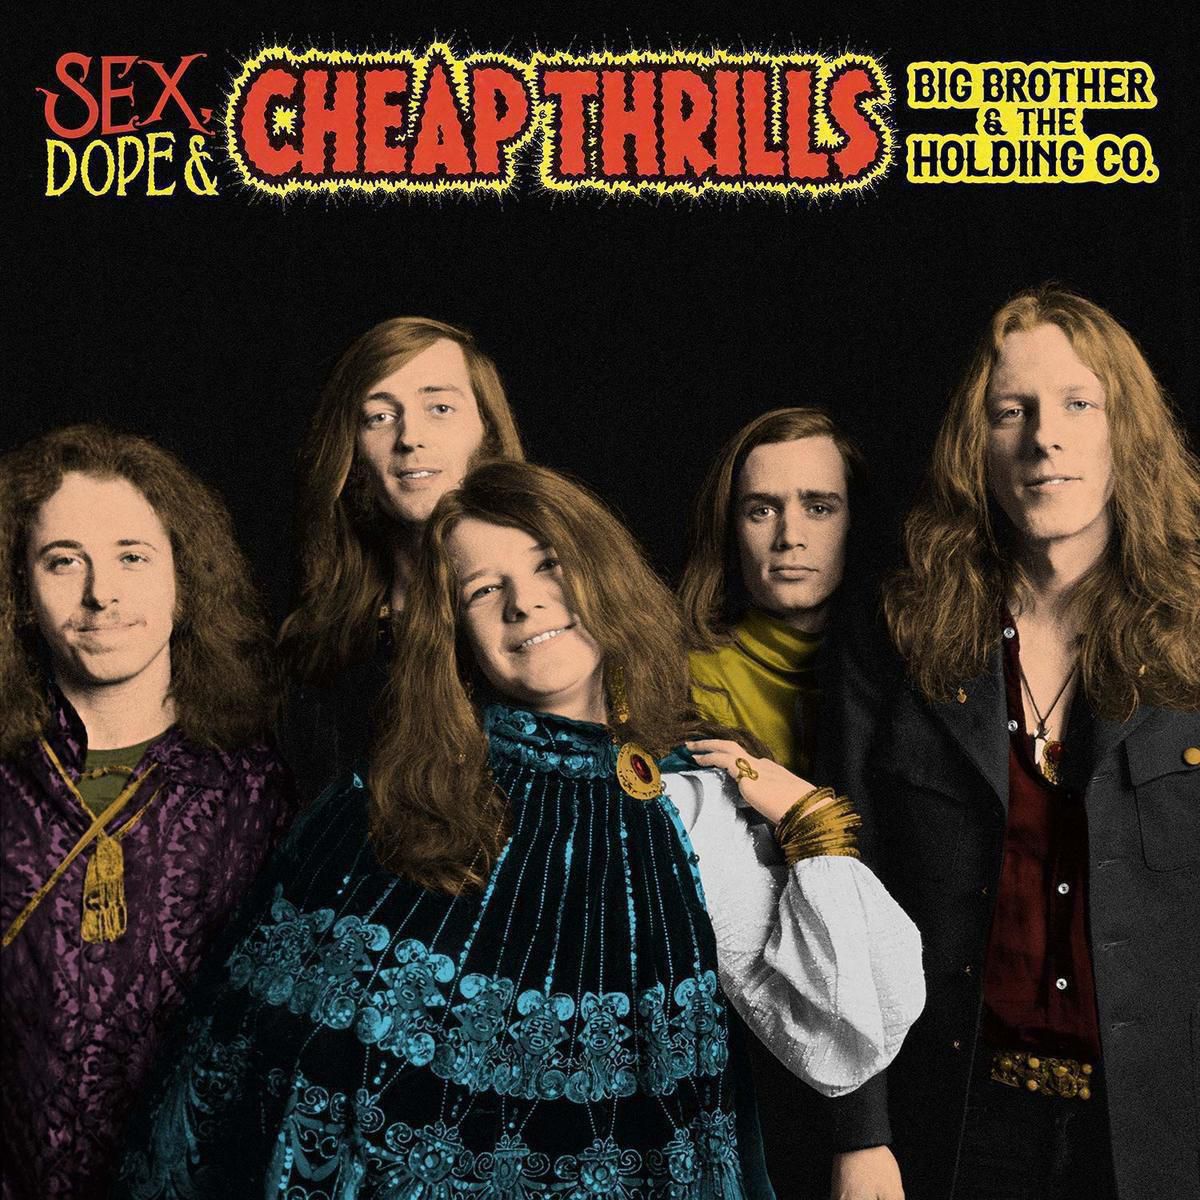 Big Brother Sex Dope Cheap Thrills